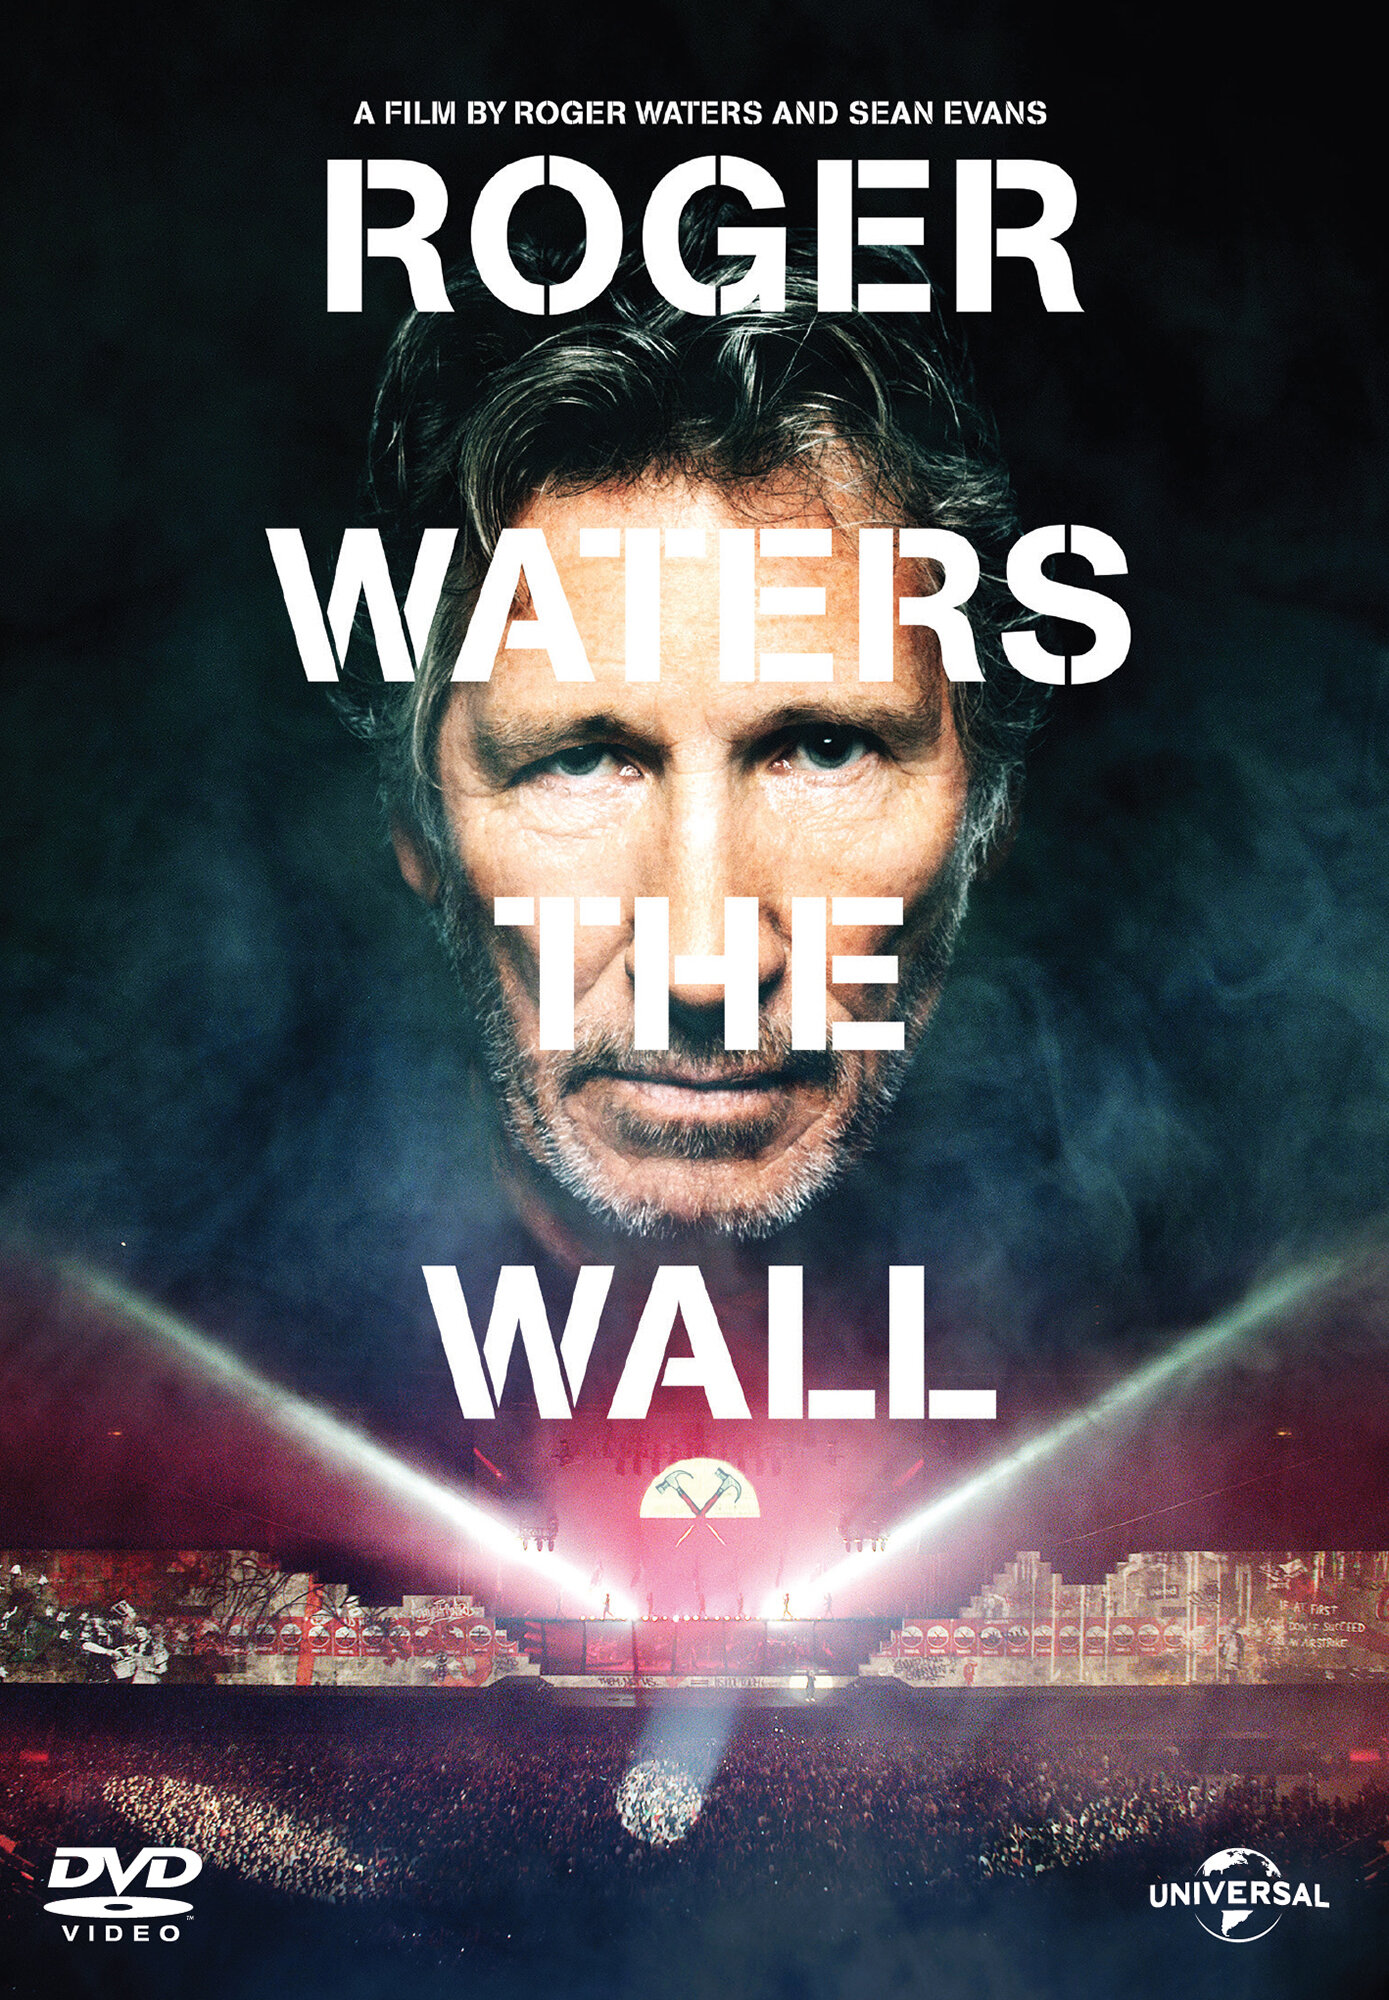 Roger Waters The Wall | Film Promo and Packaging Design